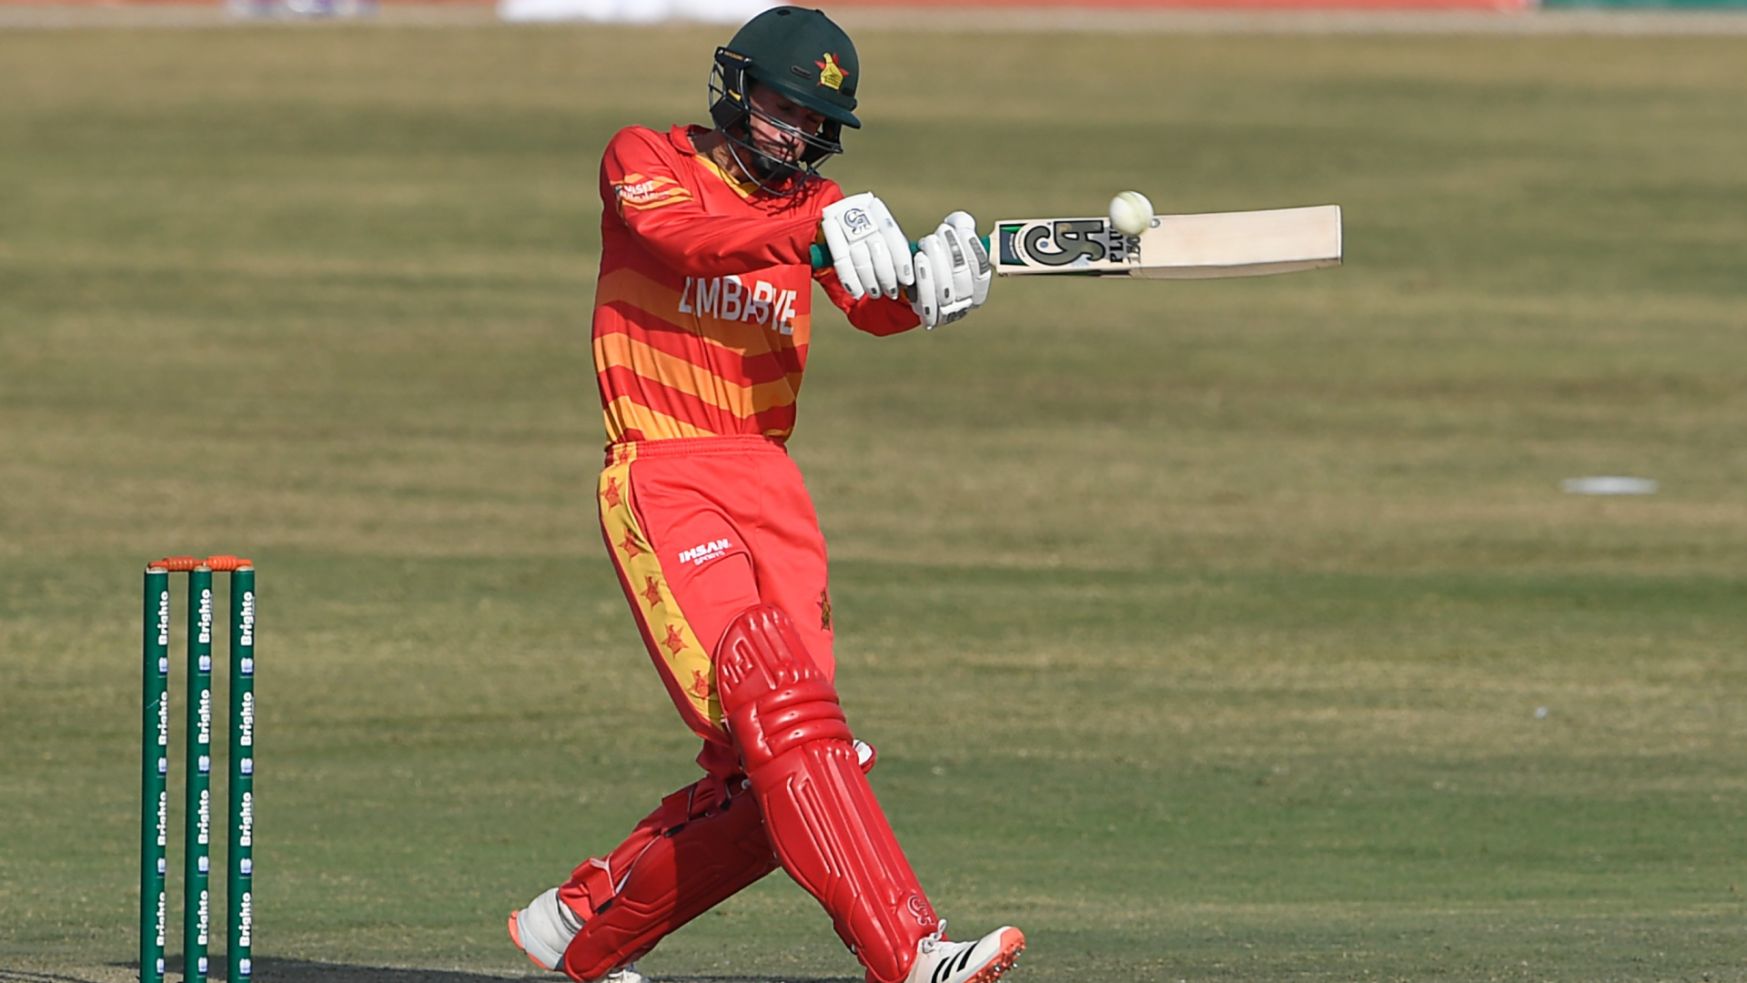 ICC T20I rankings: Zimbabwe’s Williams enters top 10 all rounders’ list